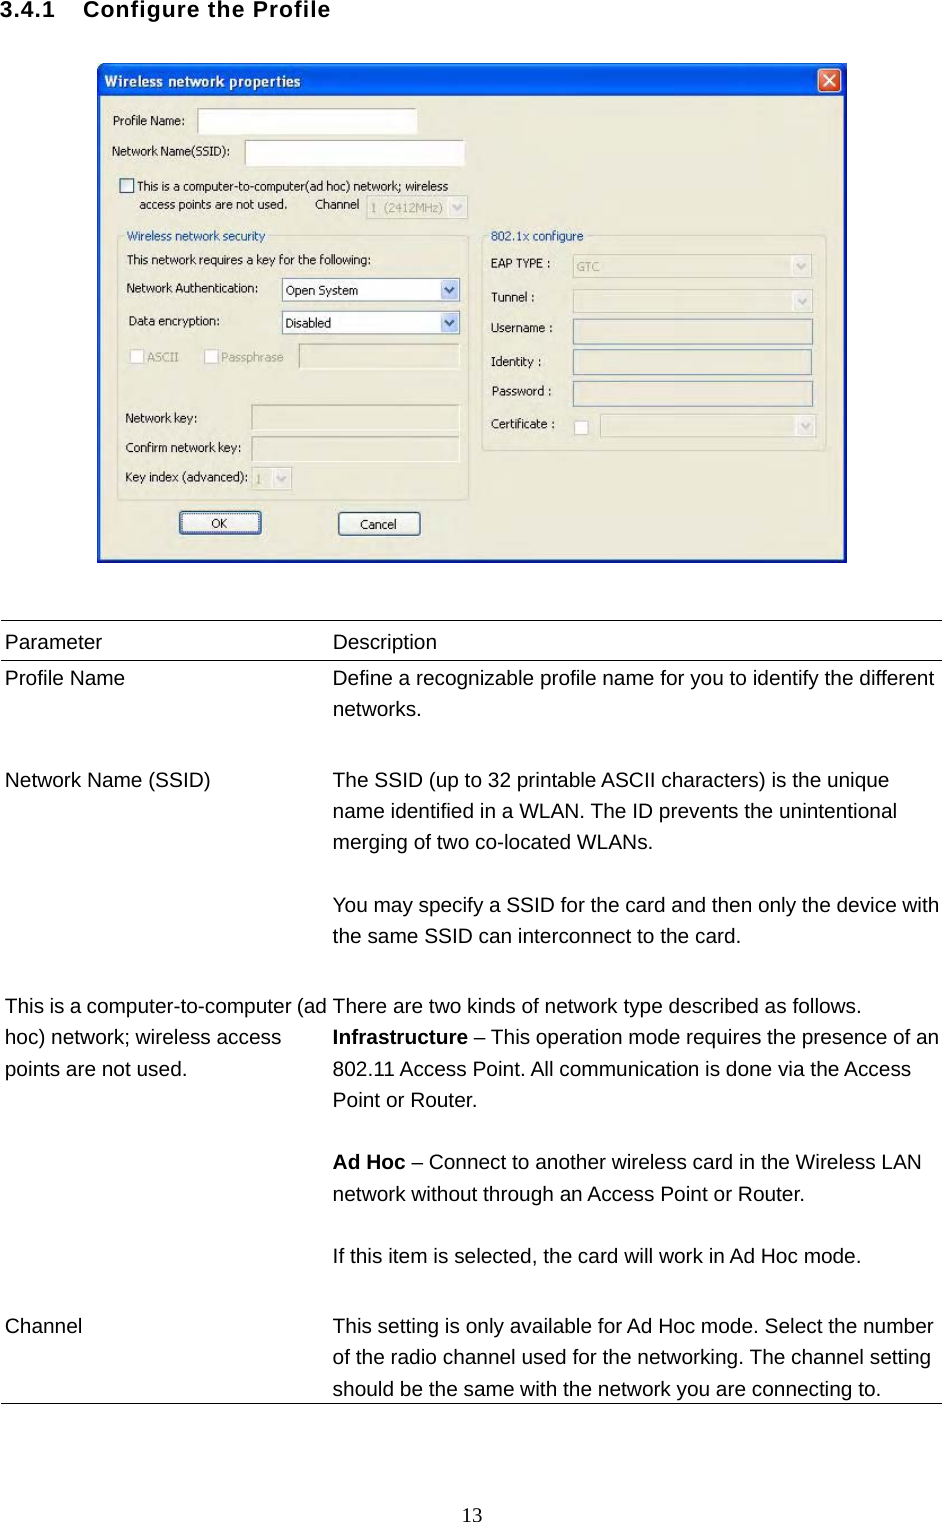  13 3.4.1    Configure the Profile     Parameter Description Profile Name  Define a recognizable profile name for you to identify the different networks.   Network Name (SSID)  The SSID (up to 32 printable ASCII characters) is the unique name identified in a WLAN. The ID prevents the unintentional merging of two co-located WLANs.    You may specify a SSID for the card and then only the device with the same SSID can interconnect to the card.   This is a computer-to-computer (ad hoc) network; wireless access points are not used. There are two kinds of network type described as follows. Infrastructure – This operation mode requires the presence of an 802.11 Access Point. All communication is done via the Access Point or Router.    Ad Hoc – Connect to another wireless card in the Wireless LAN network without through an Access Point or Router.  If this item is selected, the card will work in Ad Hoc mode.   Channel  This setting is only available for Ad Hoc mode. Select the number of the radio channel used for the networking. The channel setting should be the same with the network you are connecting to.   